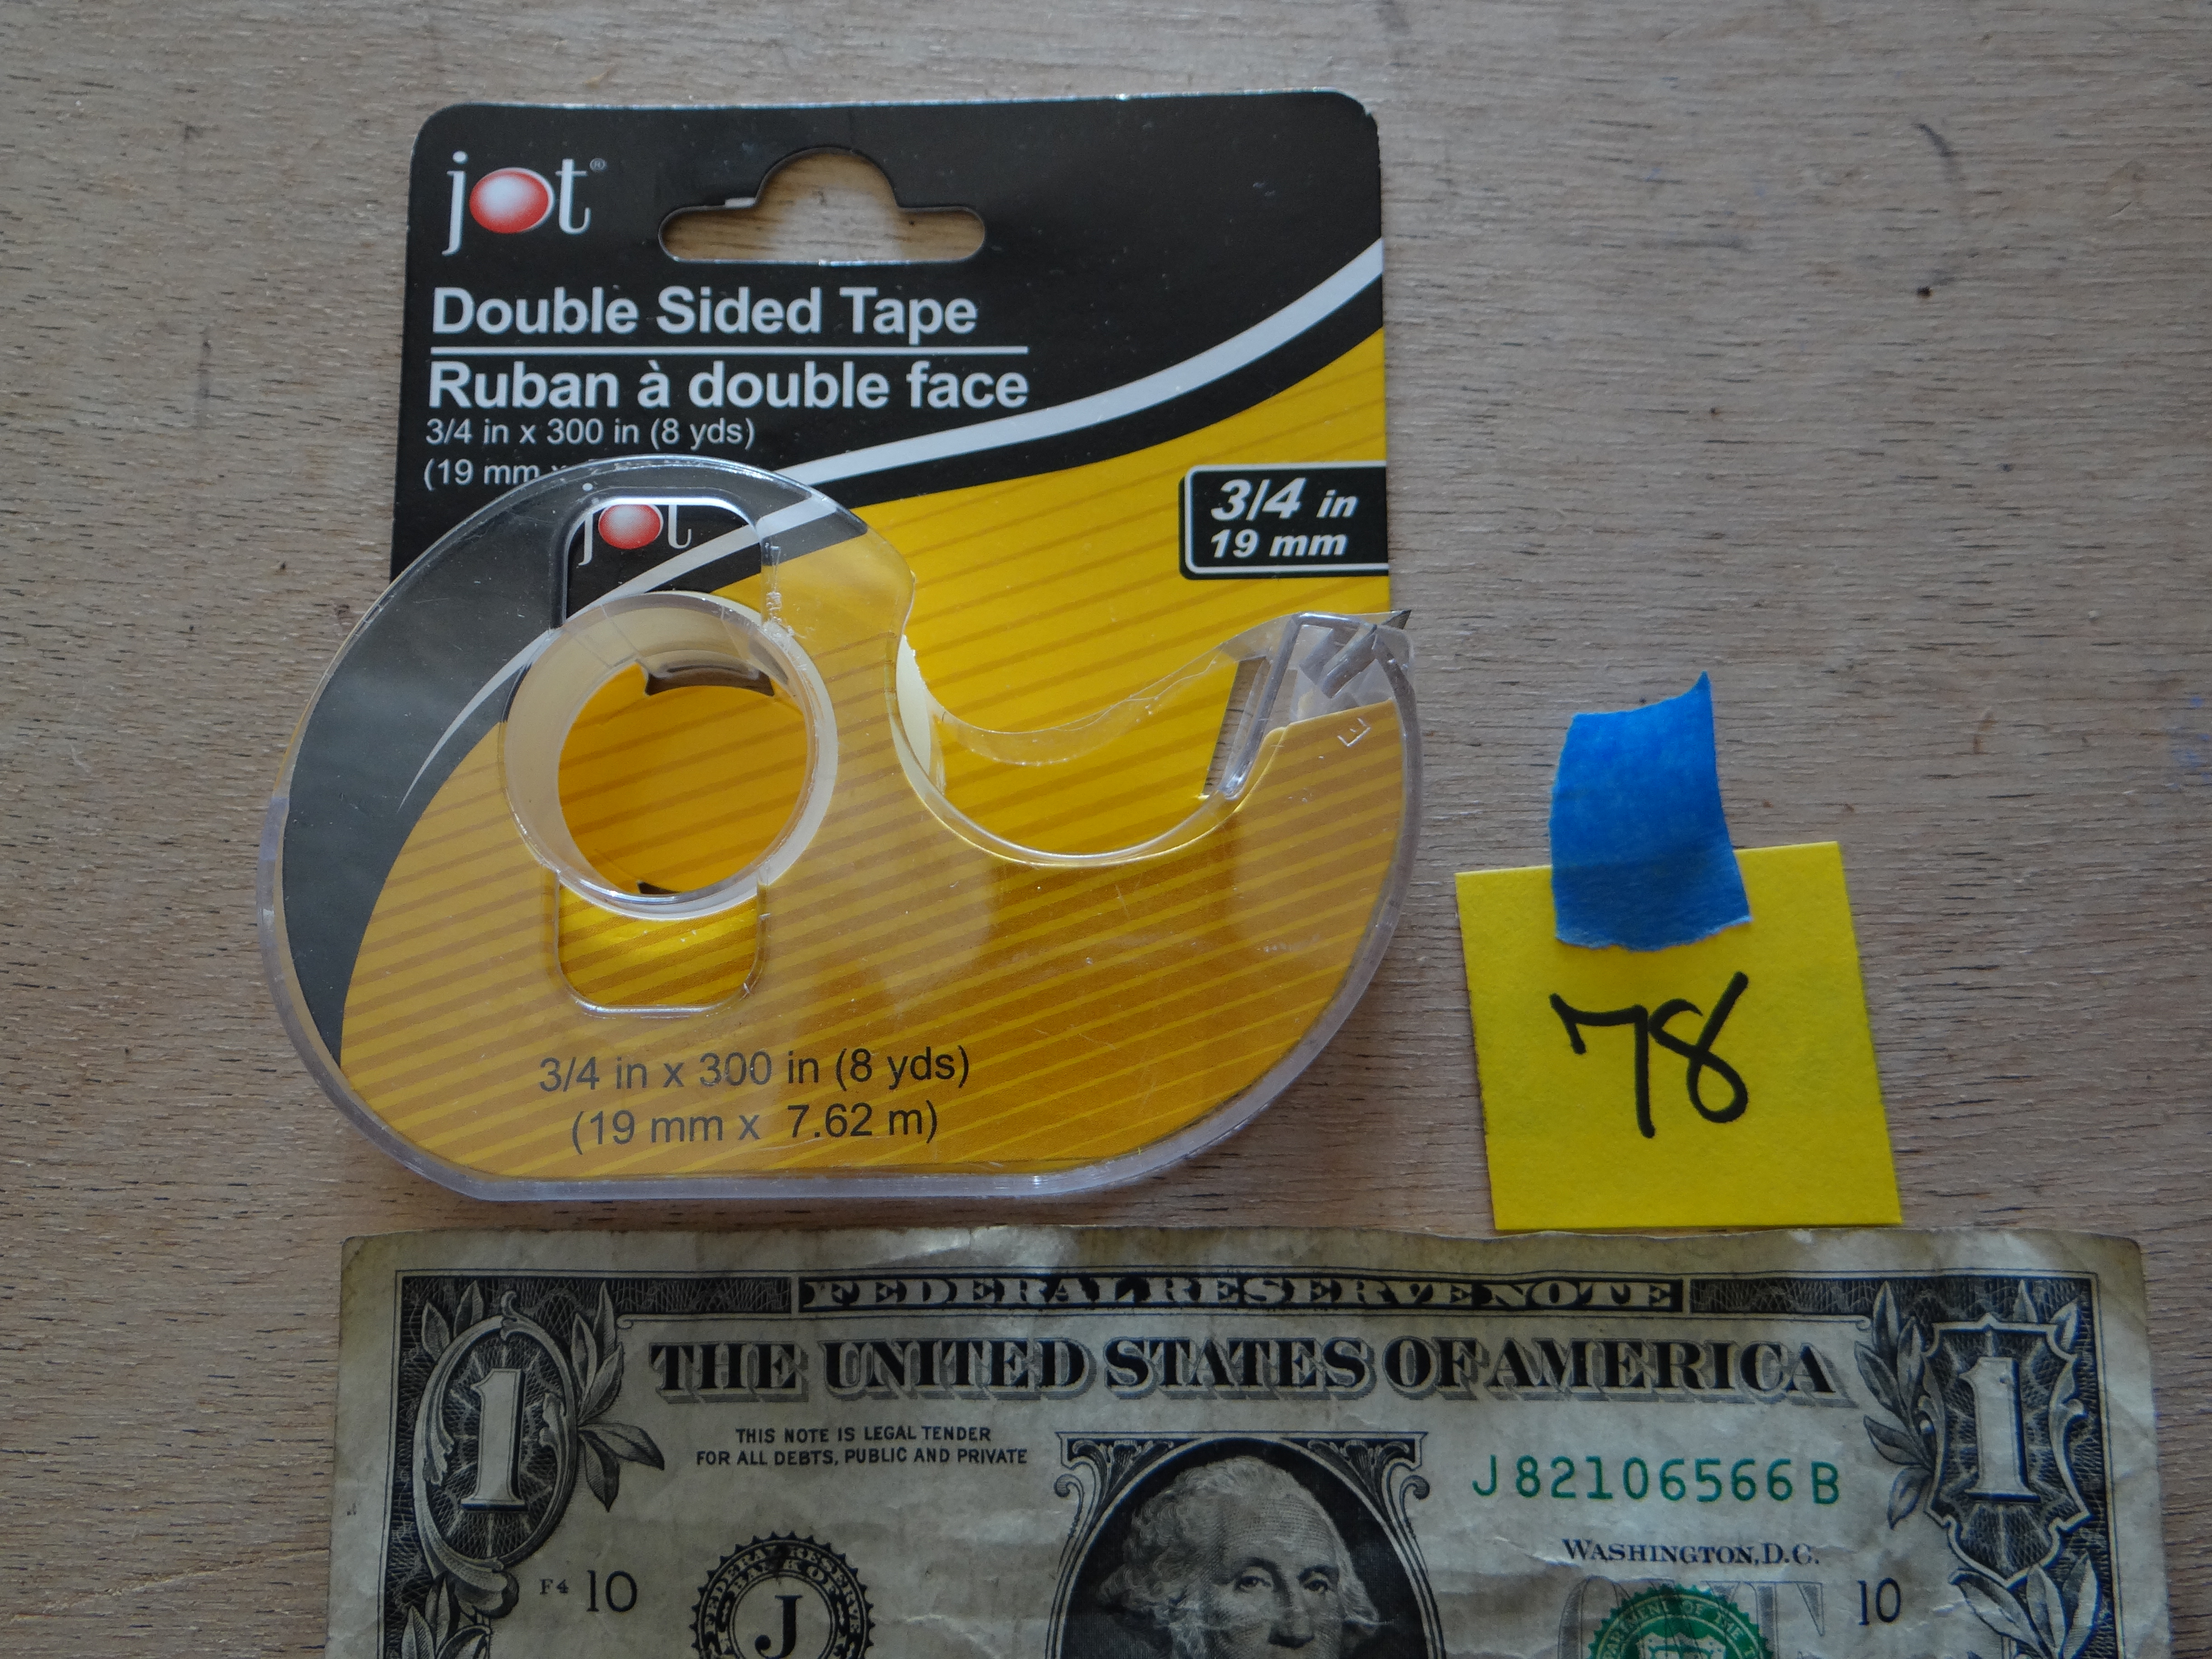 78-Jot Double Sided Tape (seems almost full)